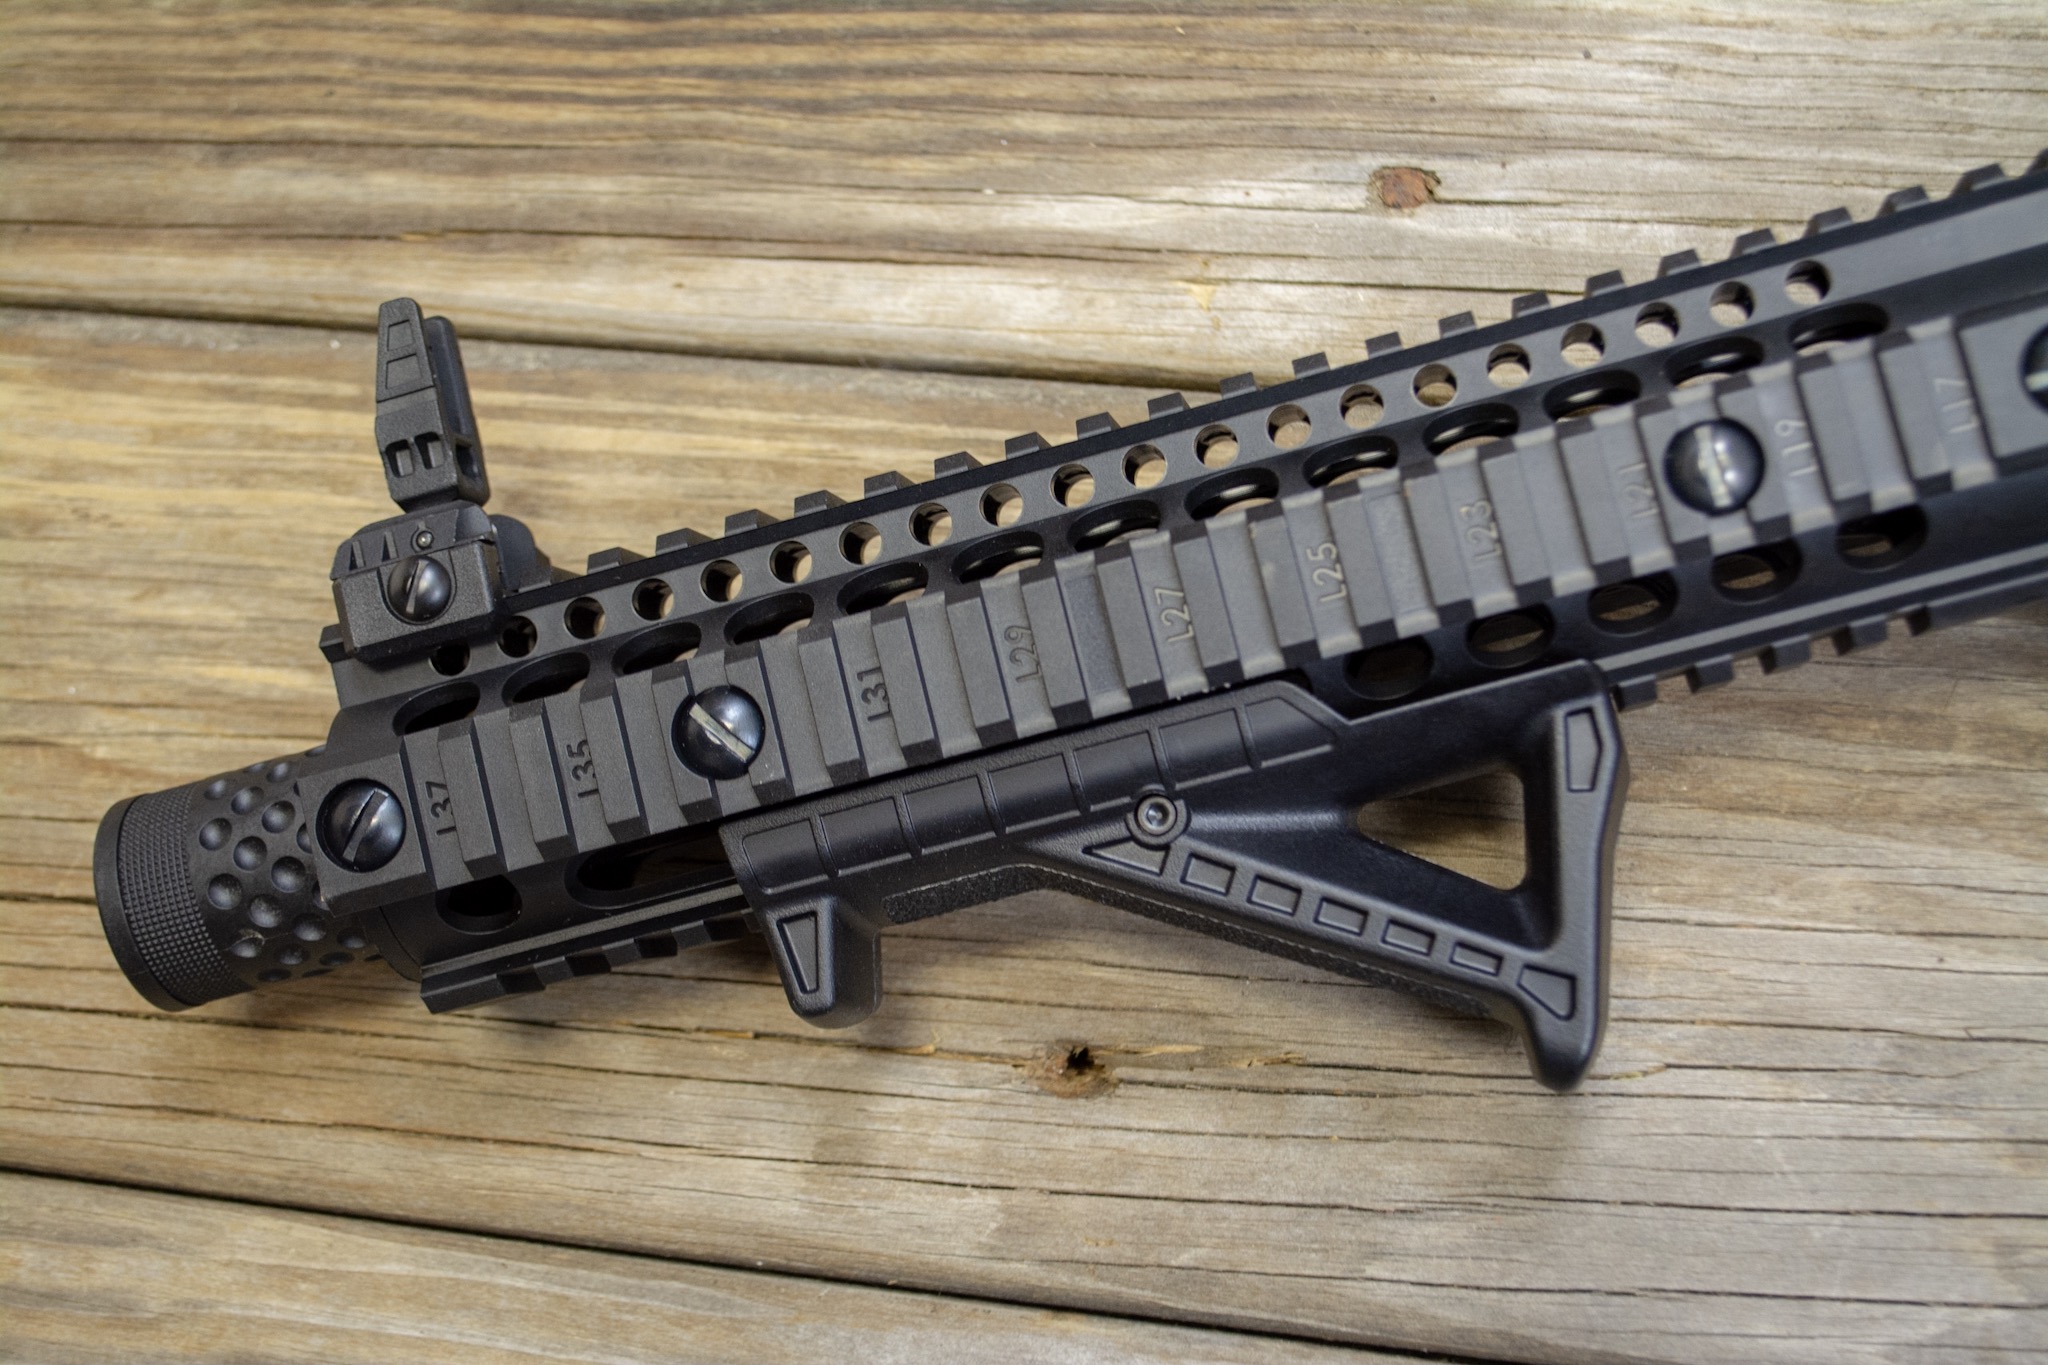 The handguard has rails all around, part of which is used for the angled grip. 